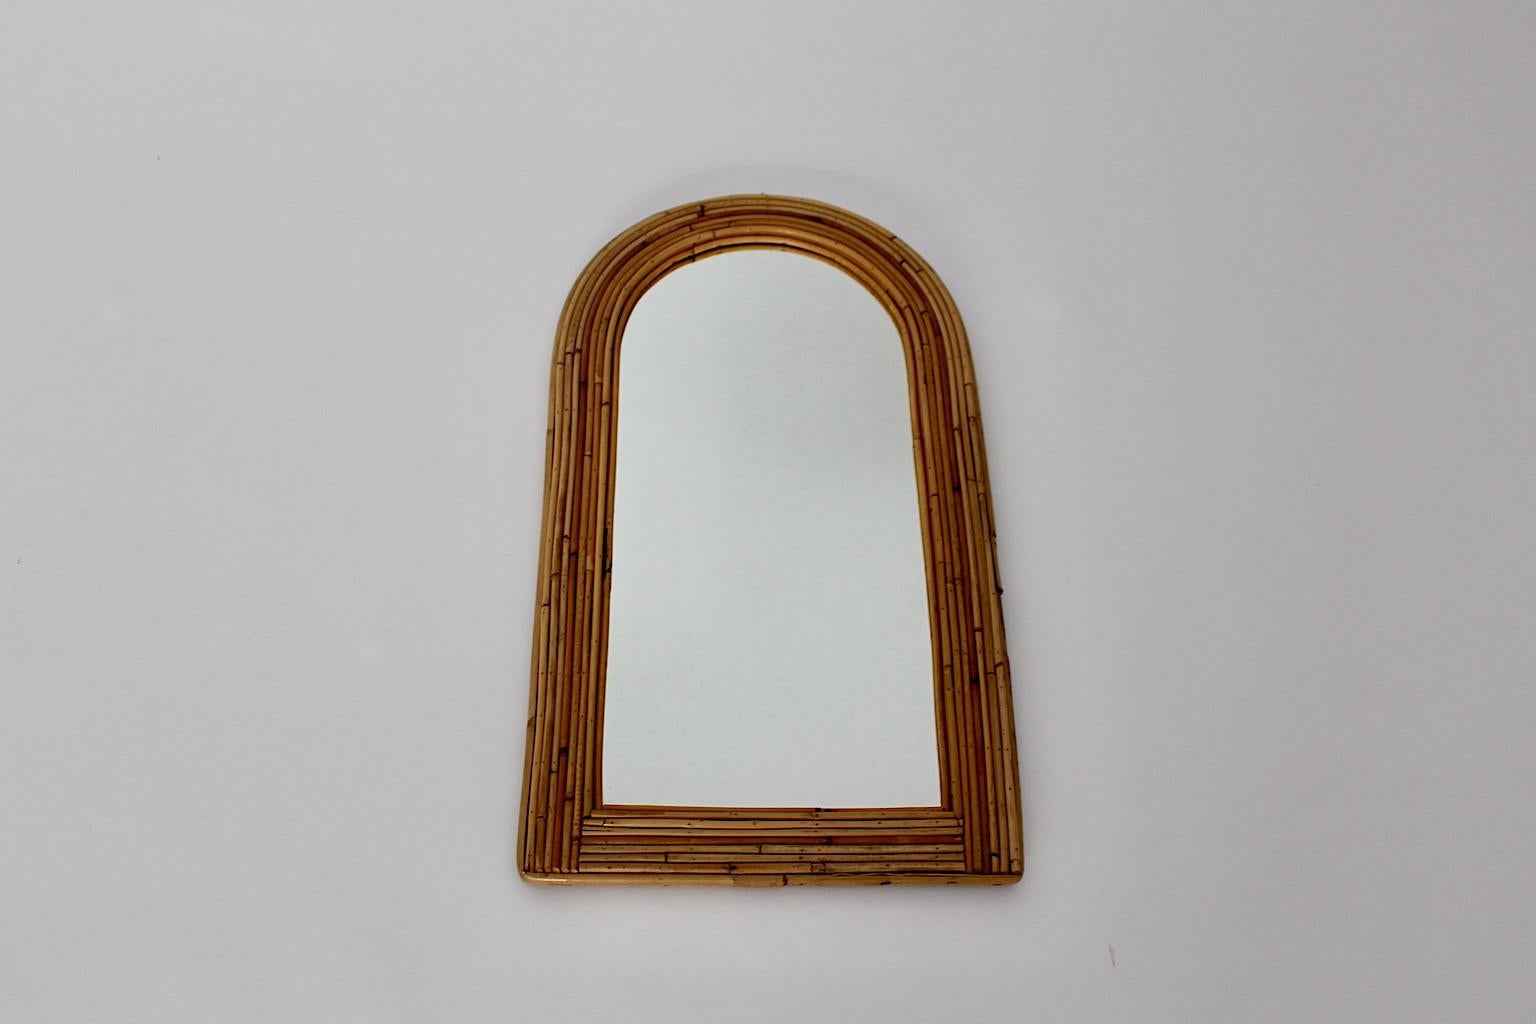 Bamboo Rattan Mid Century Modern vintage wall mirror designed 1970s France.
Beautiful shaped rattan frame with mirror glass in good condition
approx. measures:
Width 35.5
Depth 2.5 cm
Height 63.5 cm